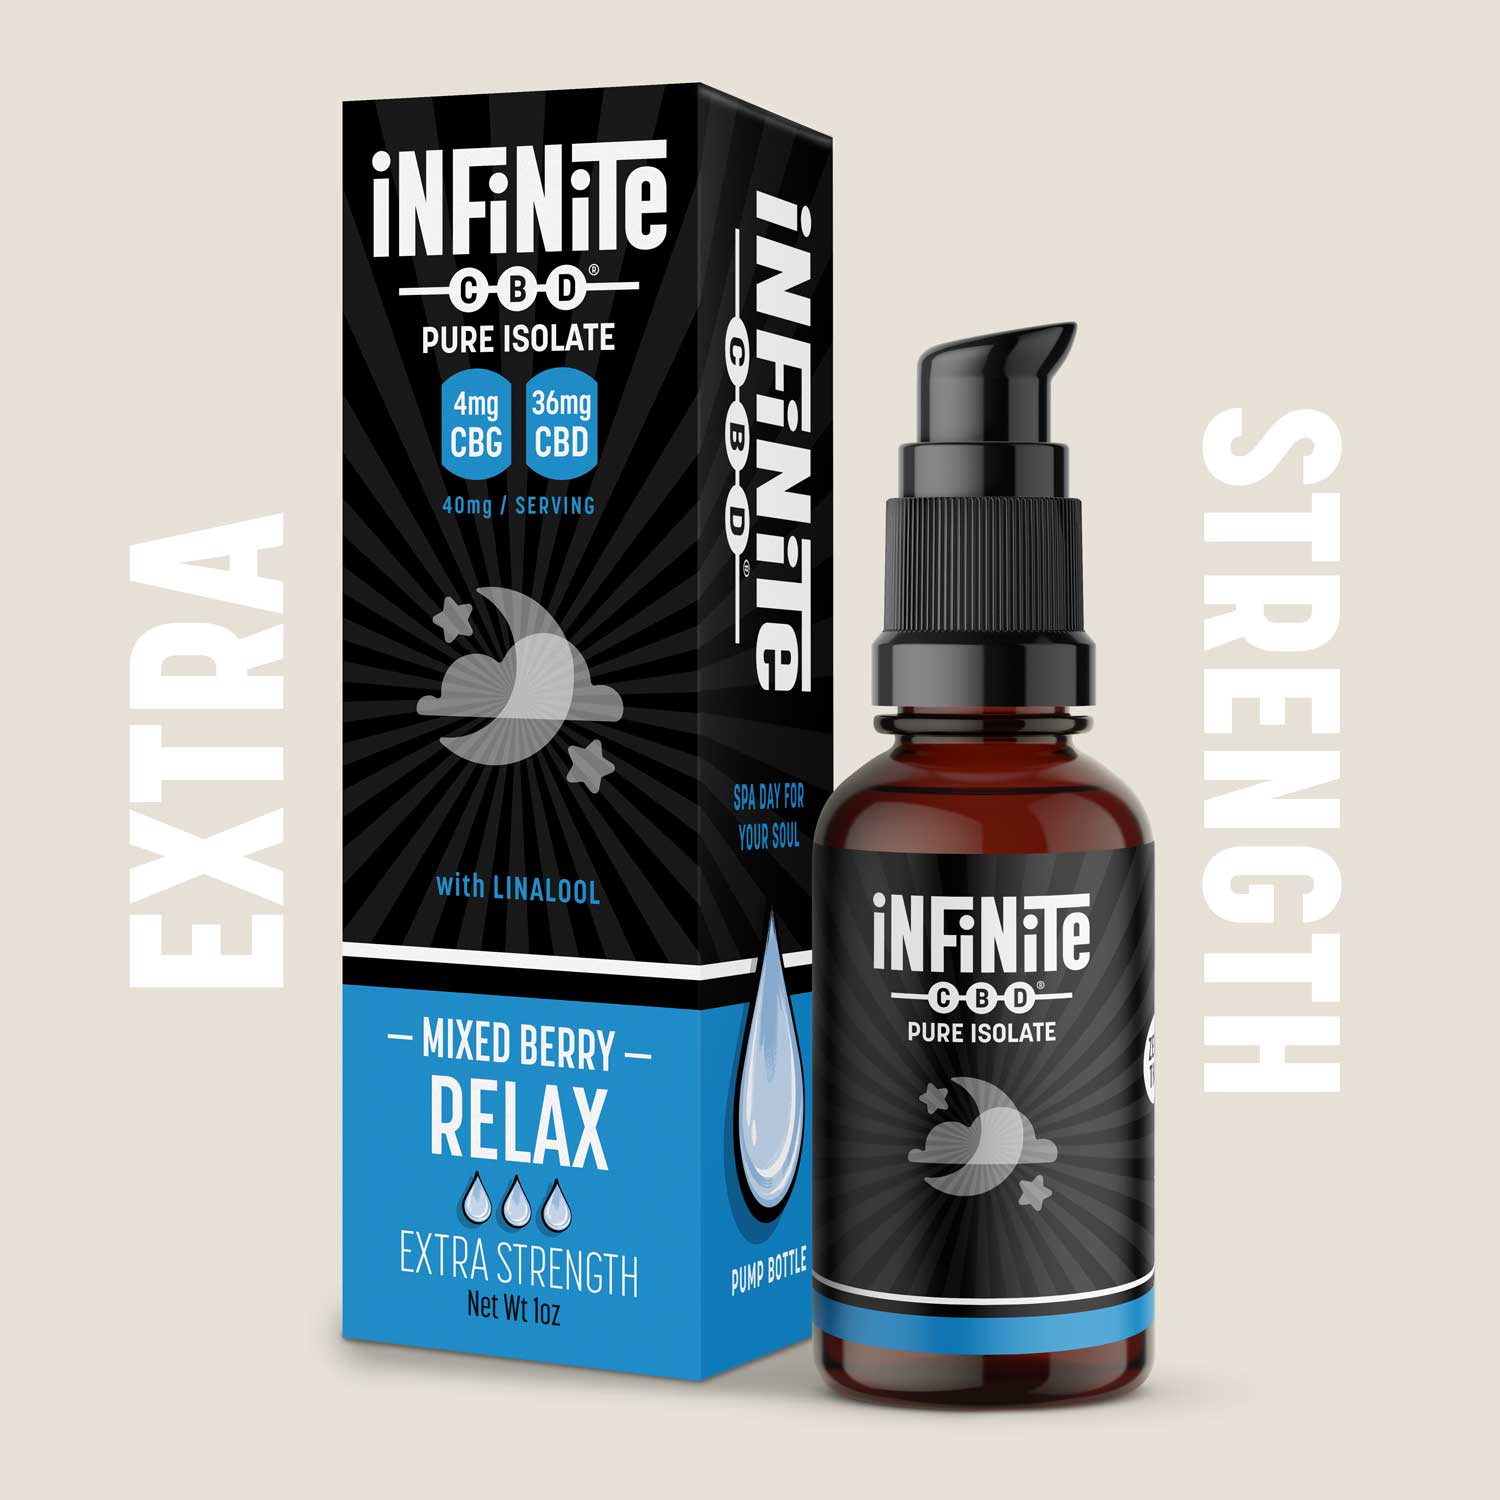 Tinctures<br>Formulation: Relax<br>CBD: Pure Isolate (Zero THC)<br>Strength: Extra (40mg/serving)